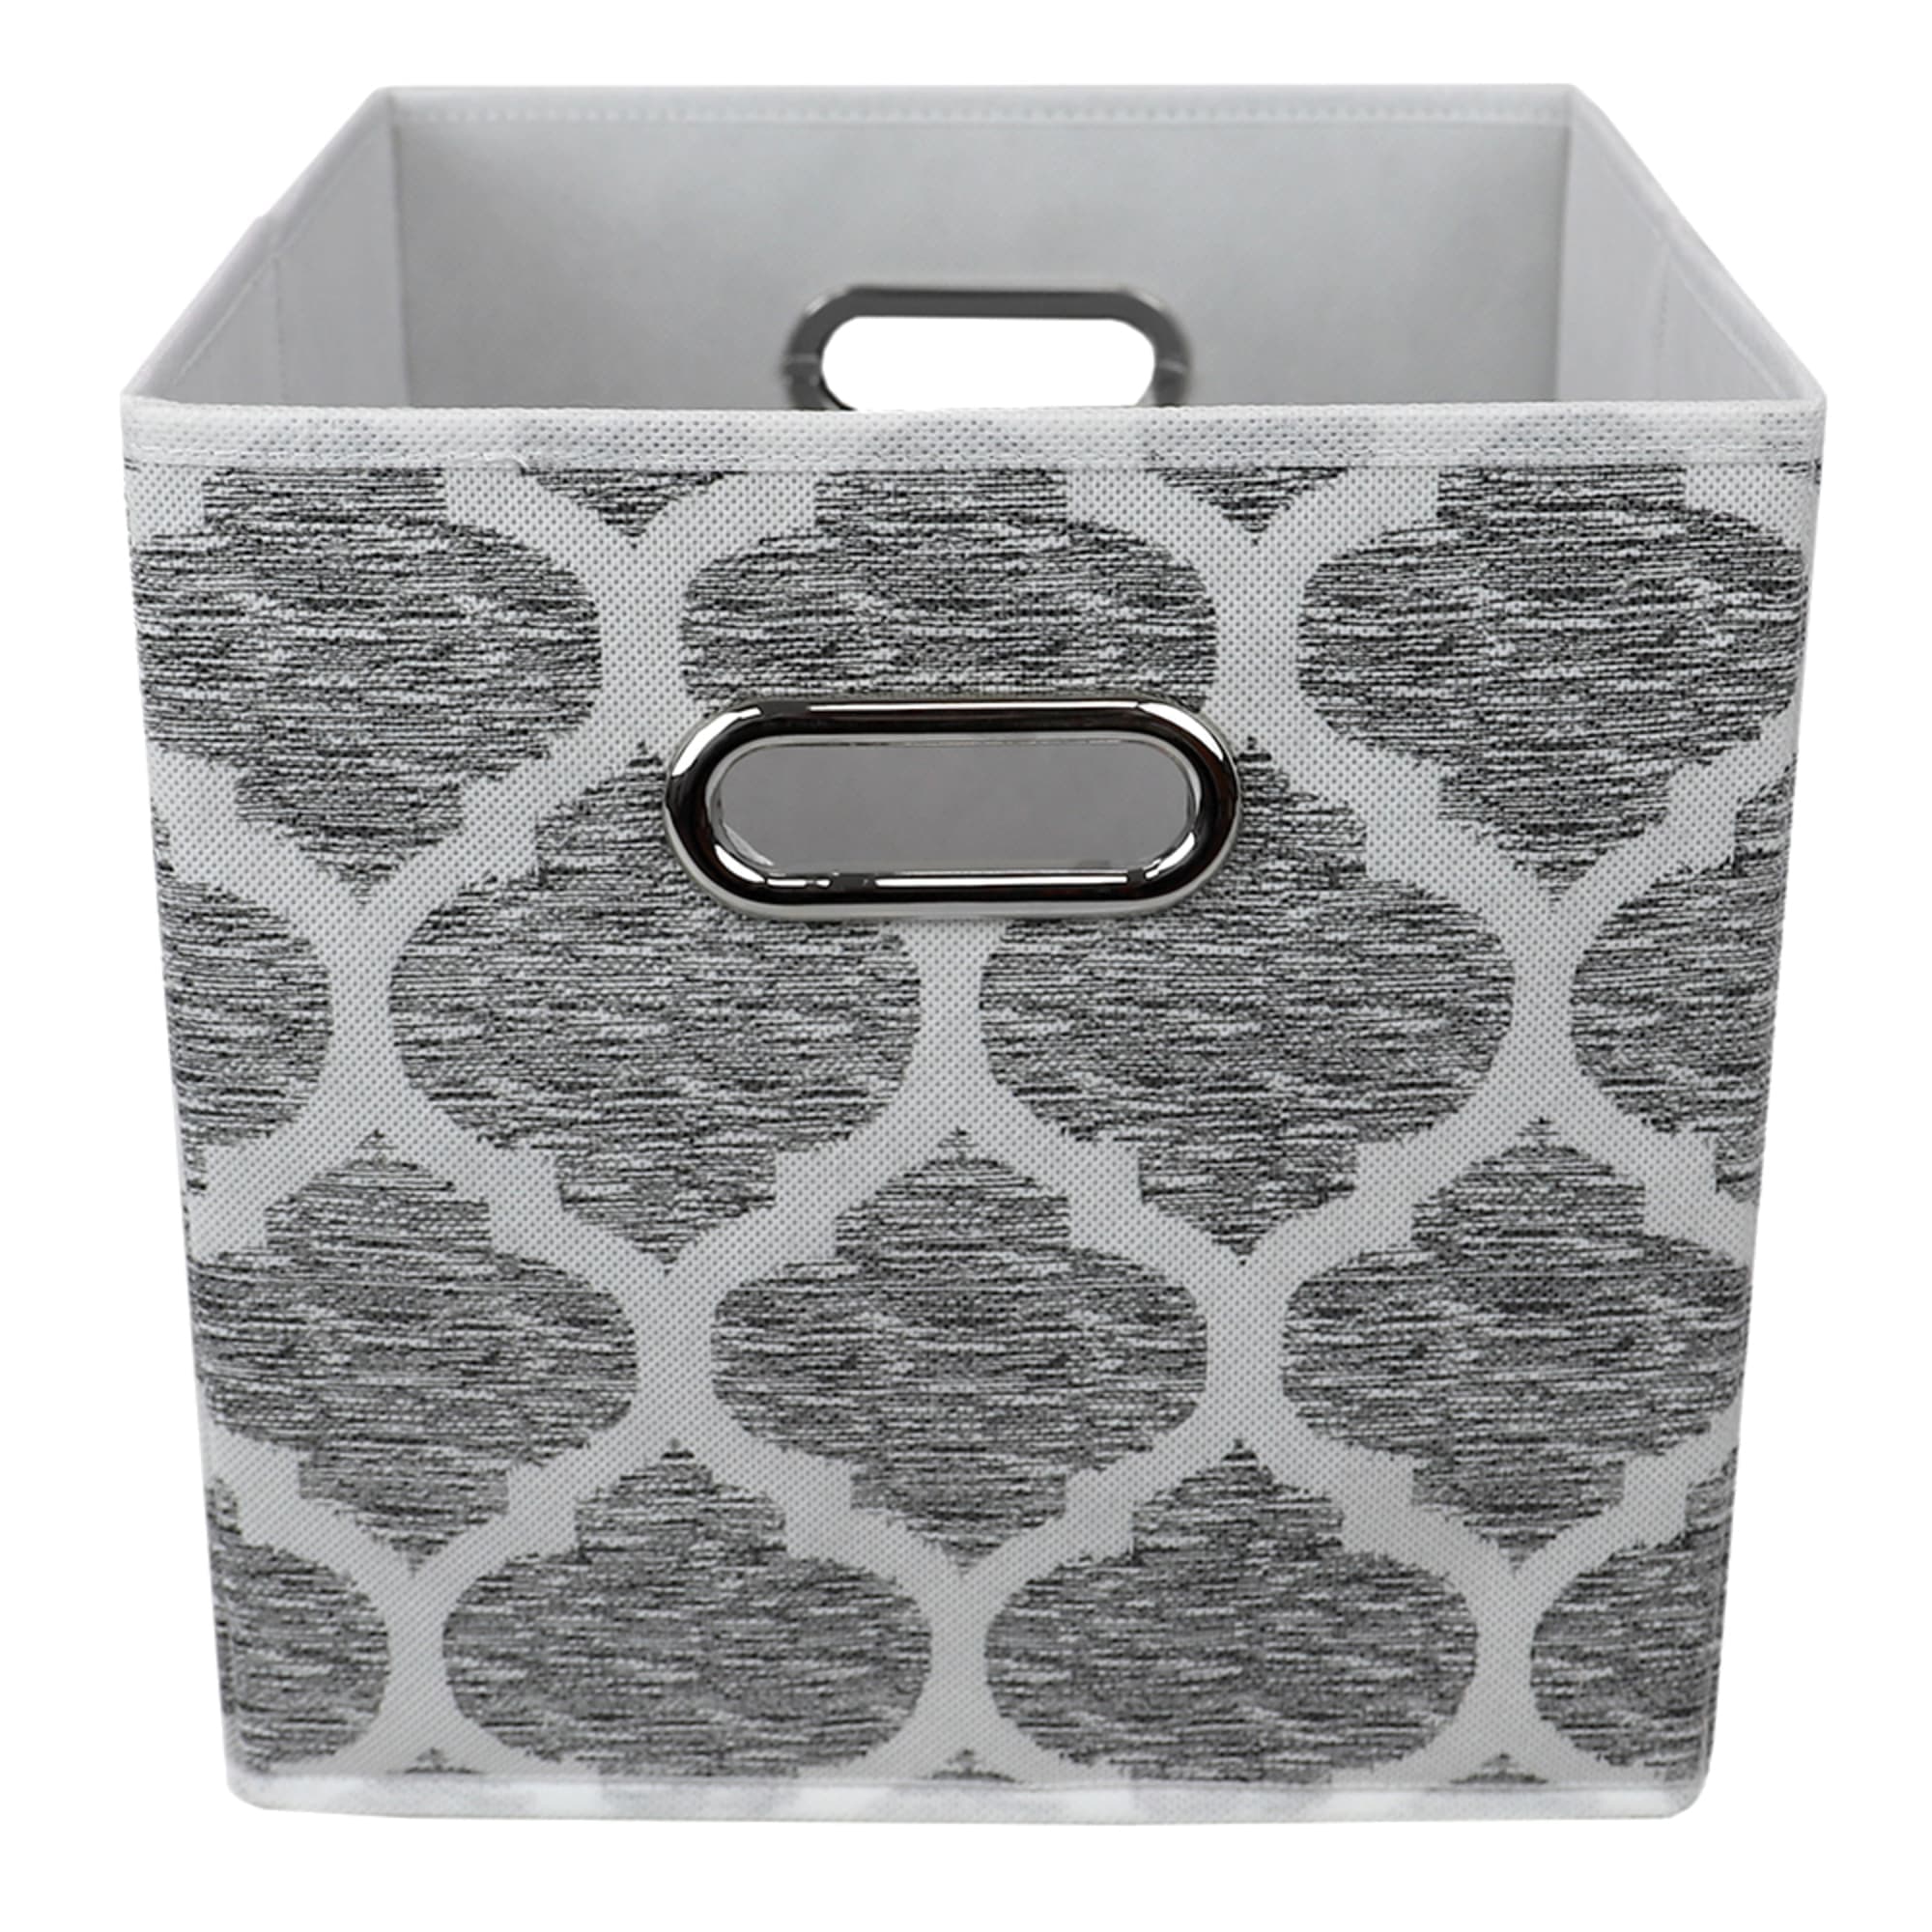 Home Basics Arabesque Non-woven Collapsible Storage Cube, Grey $4.00 EACH, CASE PACK OF 12